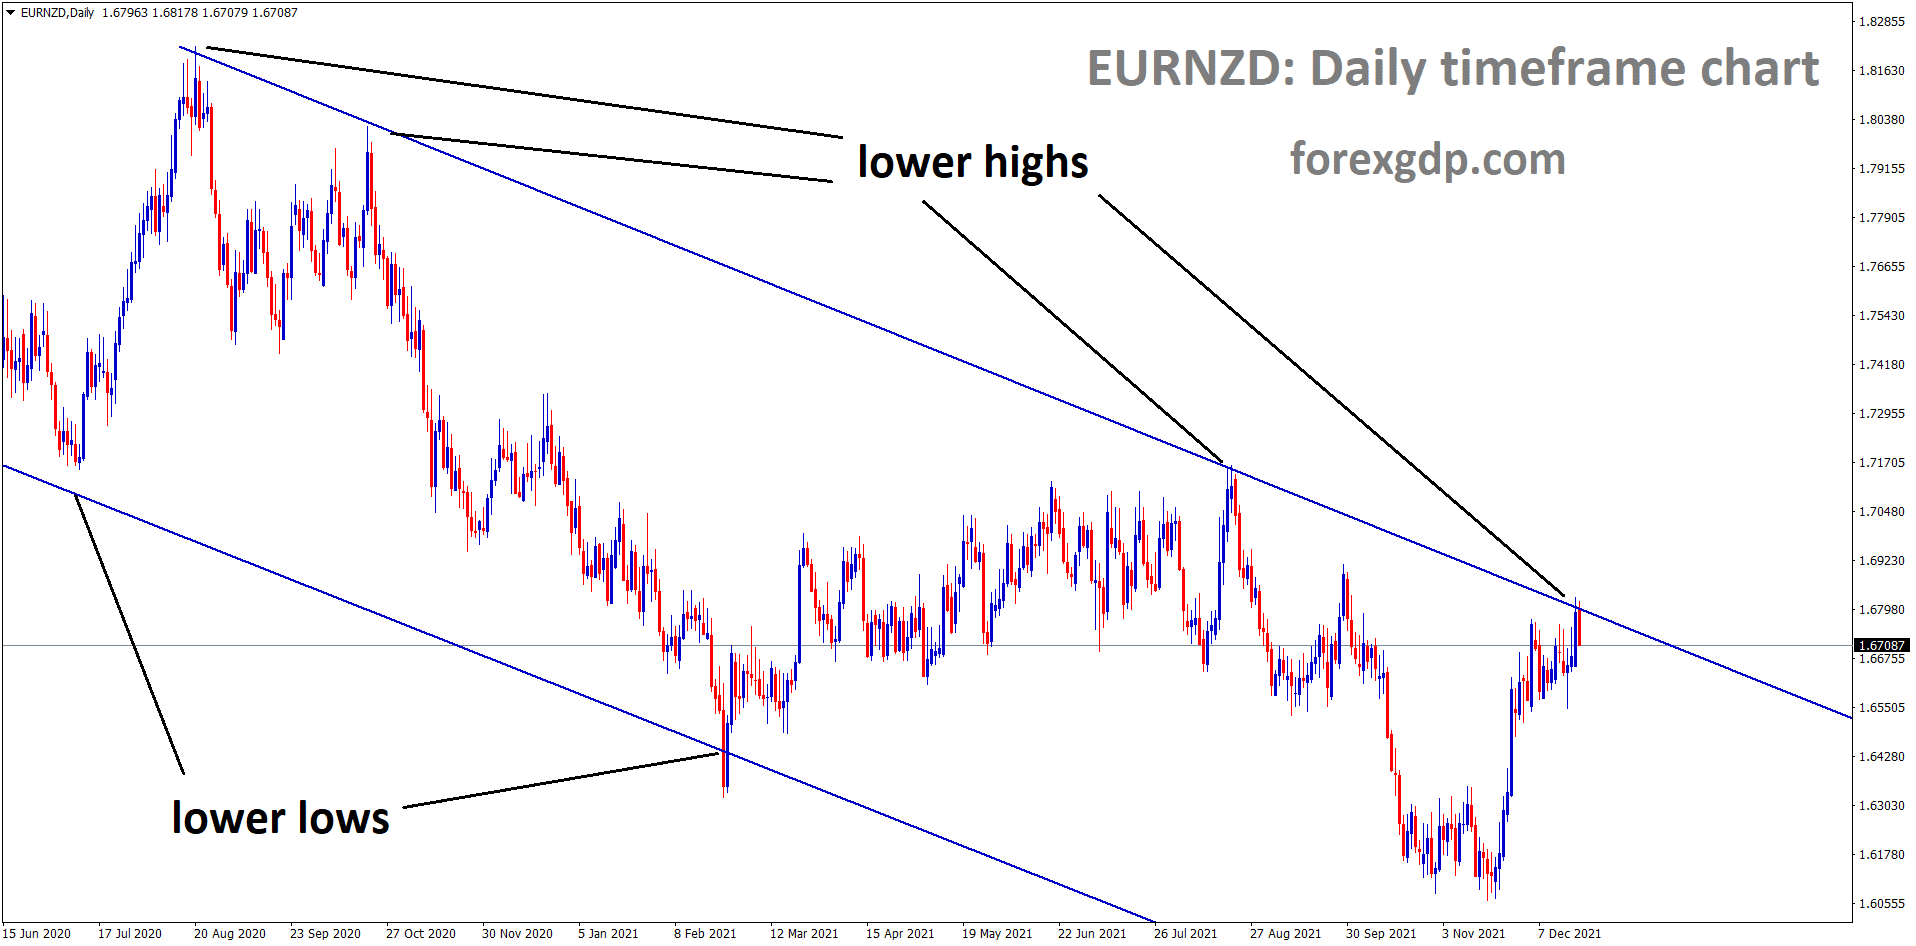 EURNZD is moving in the Descending channel and the market has reached the lower higher area of the channel